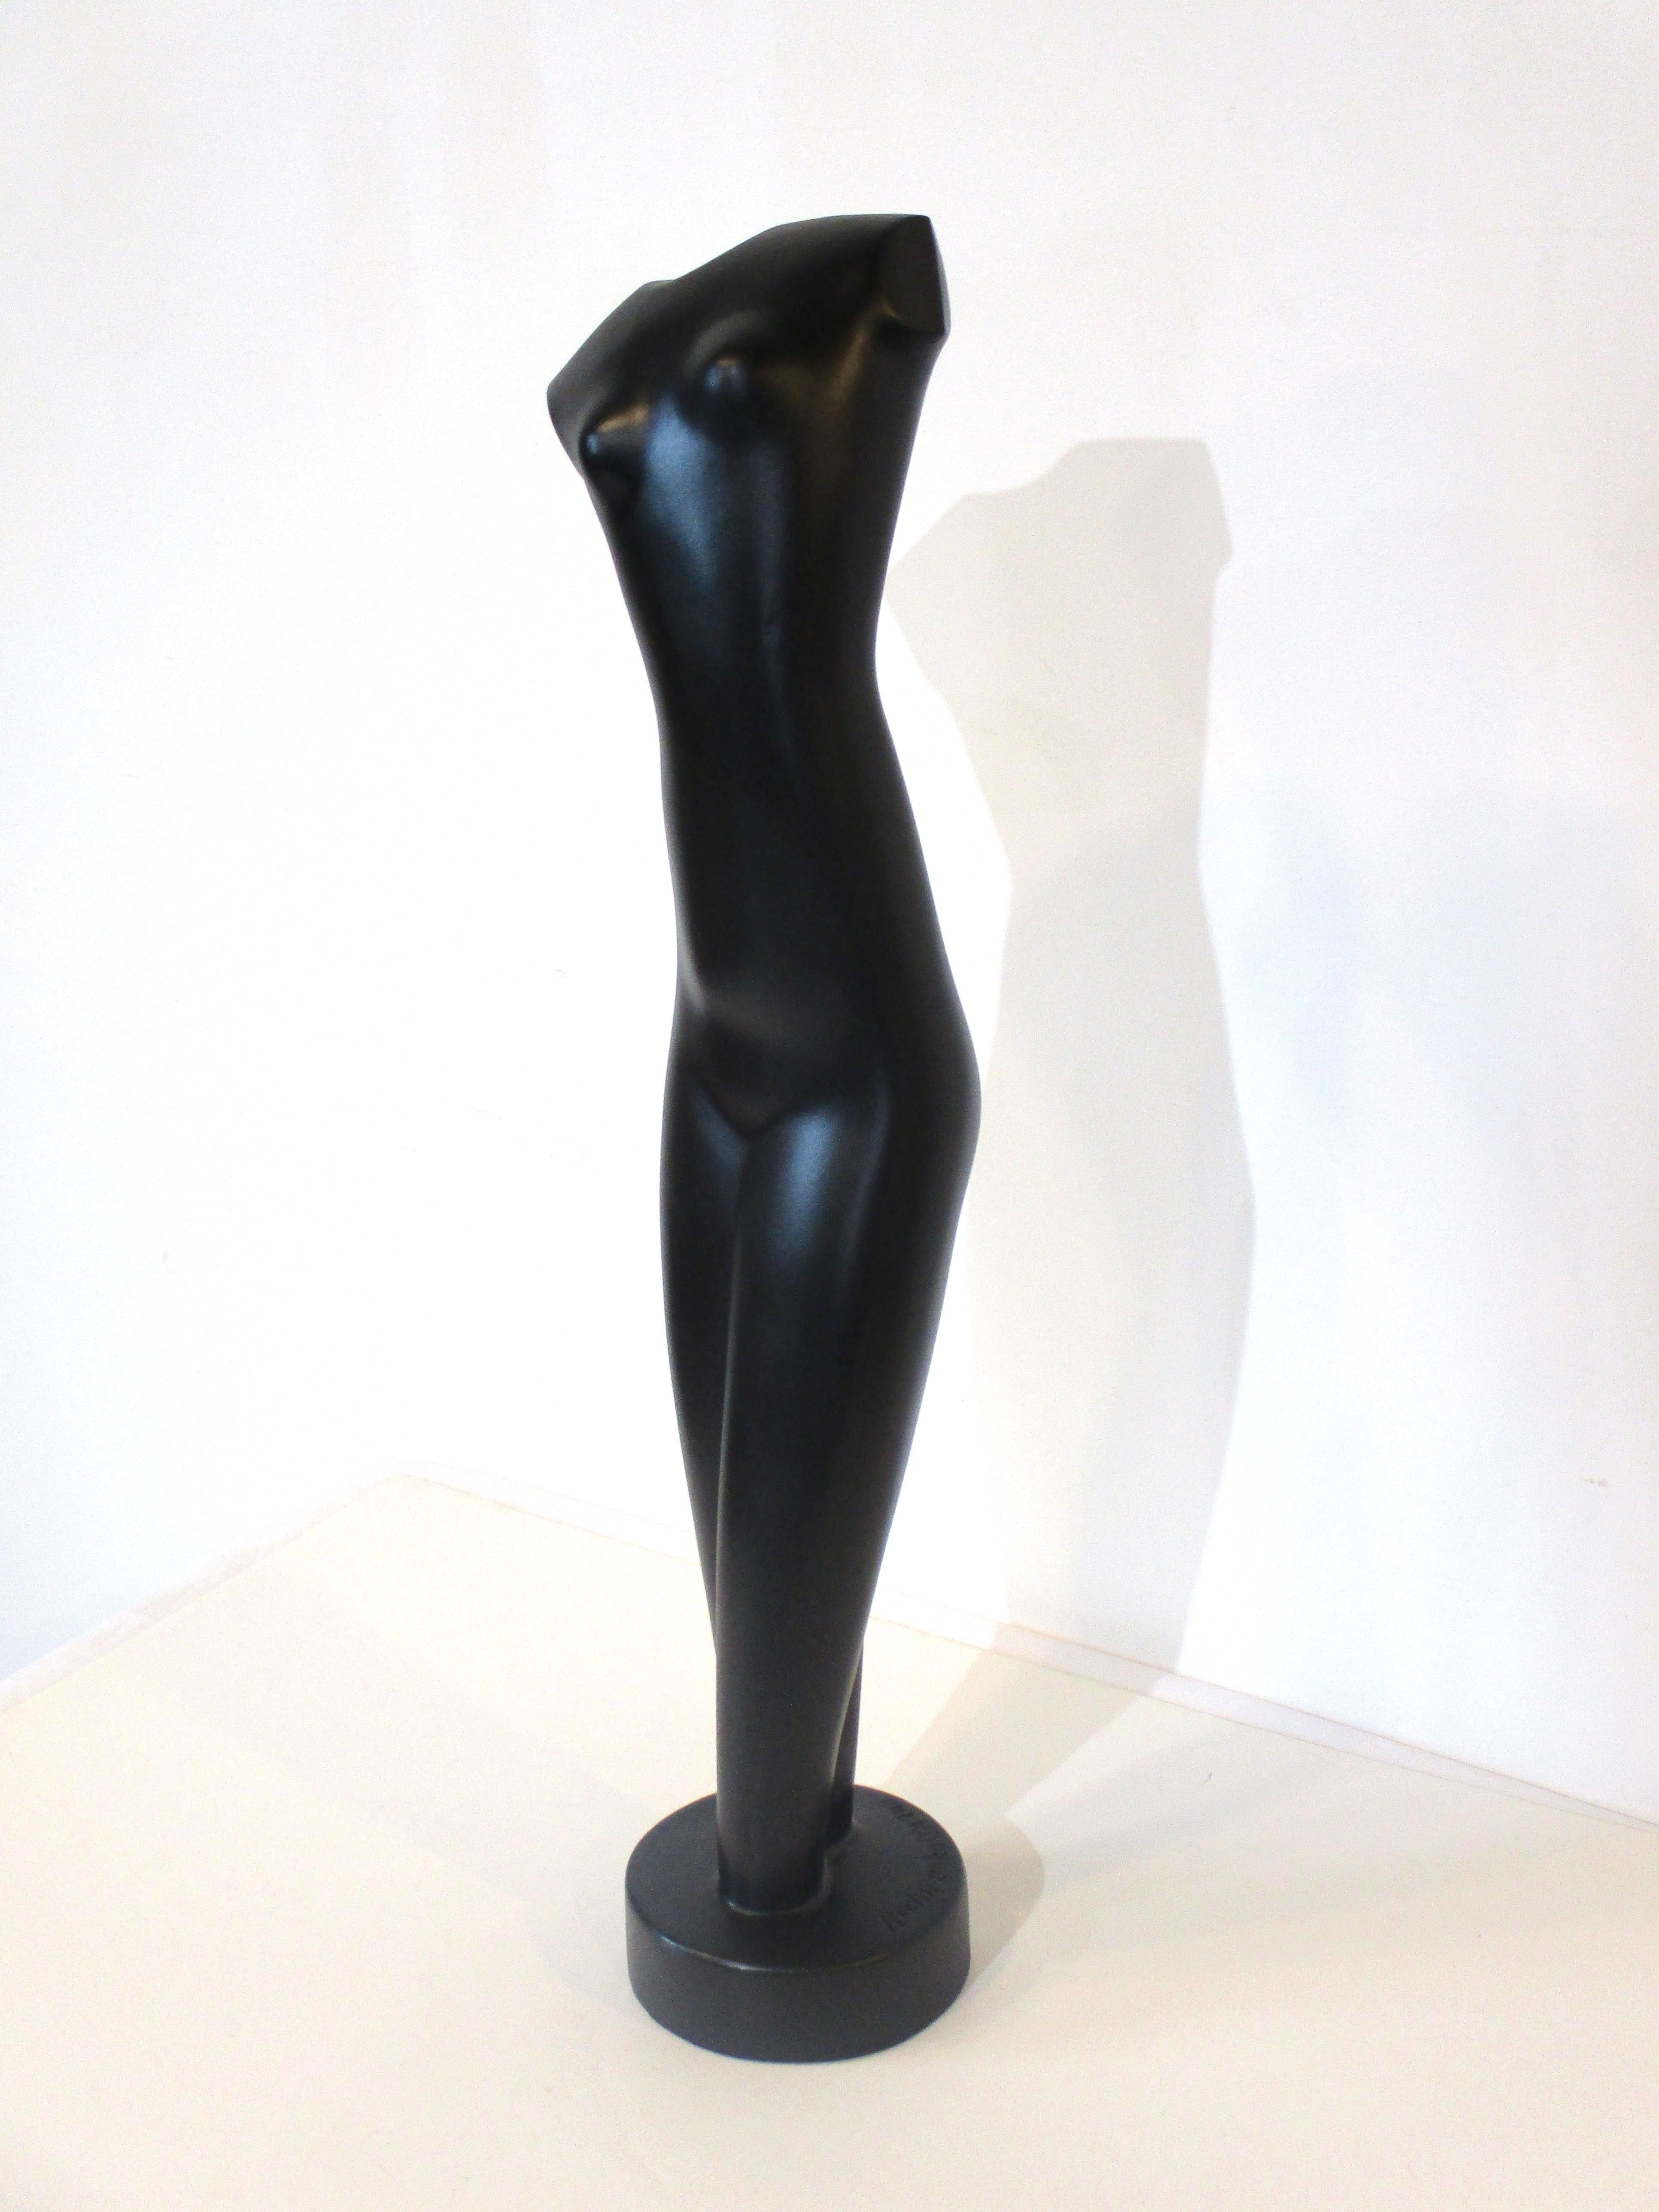 A cast nude sculpture of a women in a satin black finish with rounded base titled 